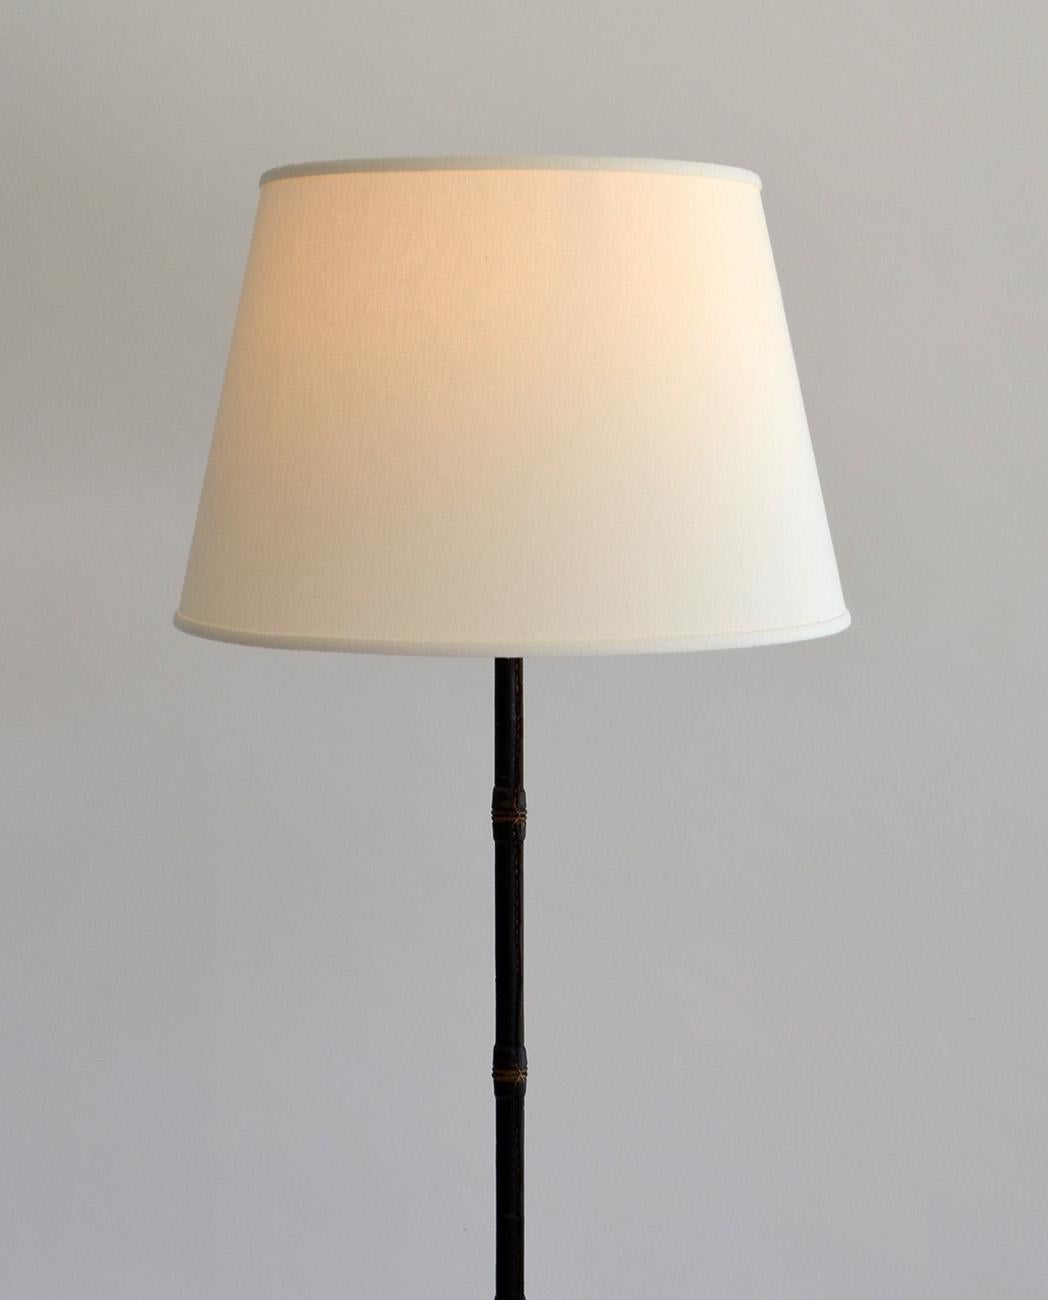 20th Century Jacques Adnet Leather Wrapped Floor Lamp, France c. 1950 For Sale